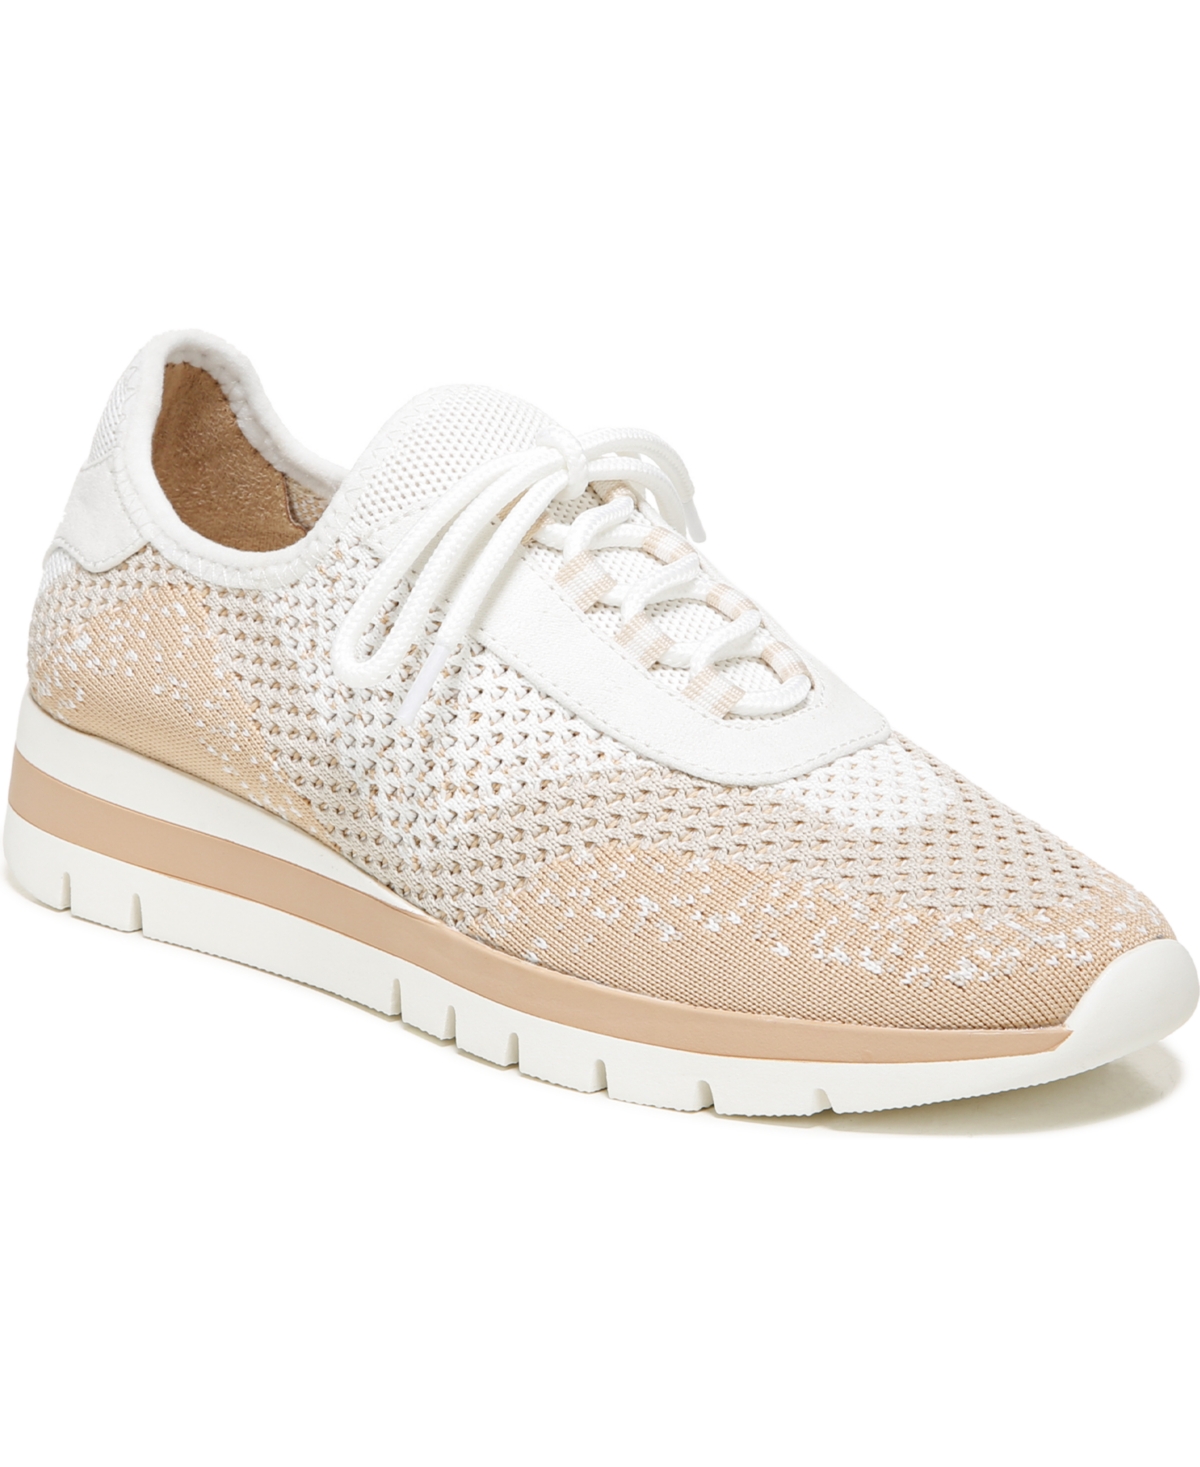 Soul Naturalizer Charlie-knit Slip-on Sneakers Women's Shoes In White/tan Fly Knit